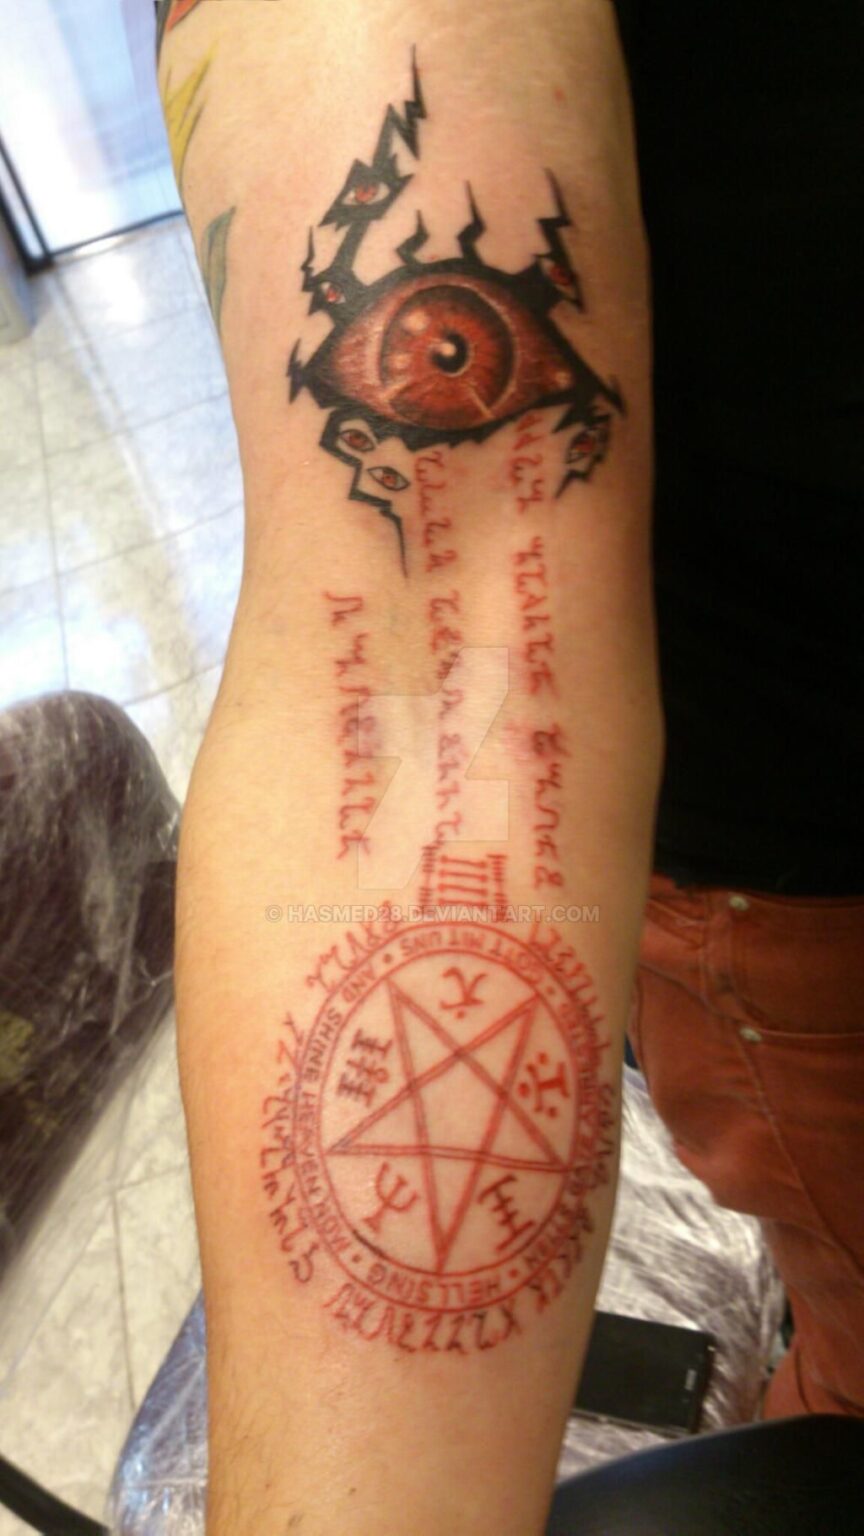 Supernatural Tattoo - Symbolism and Meaning.